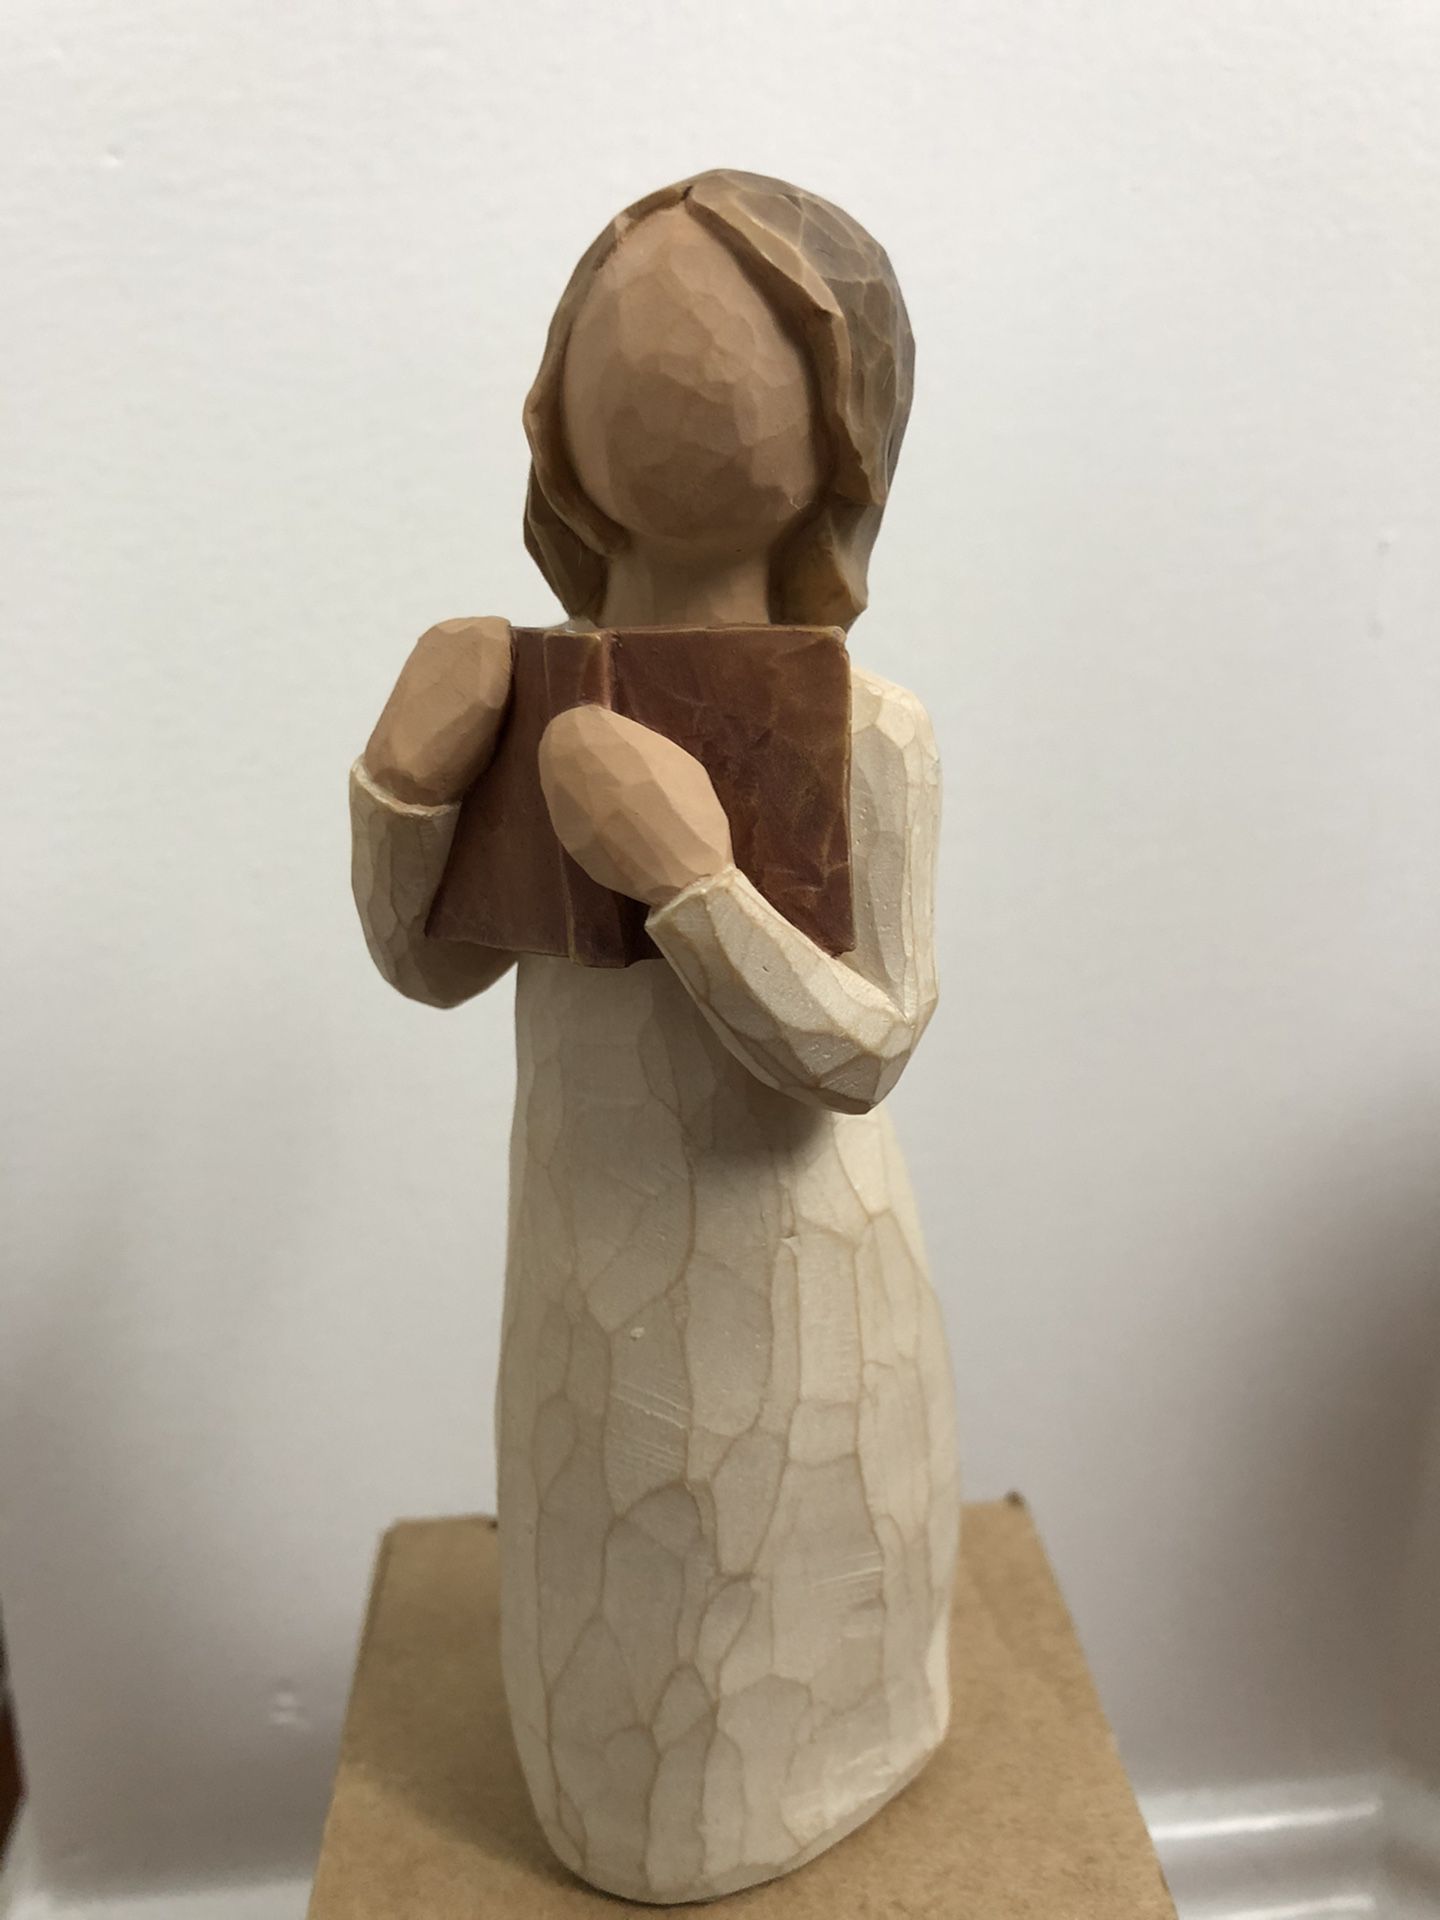 New Willow Tree Love of Learning, Sculpted Hand-Painted Figure.